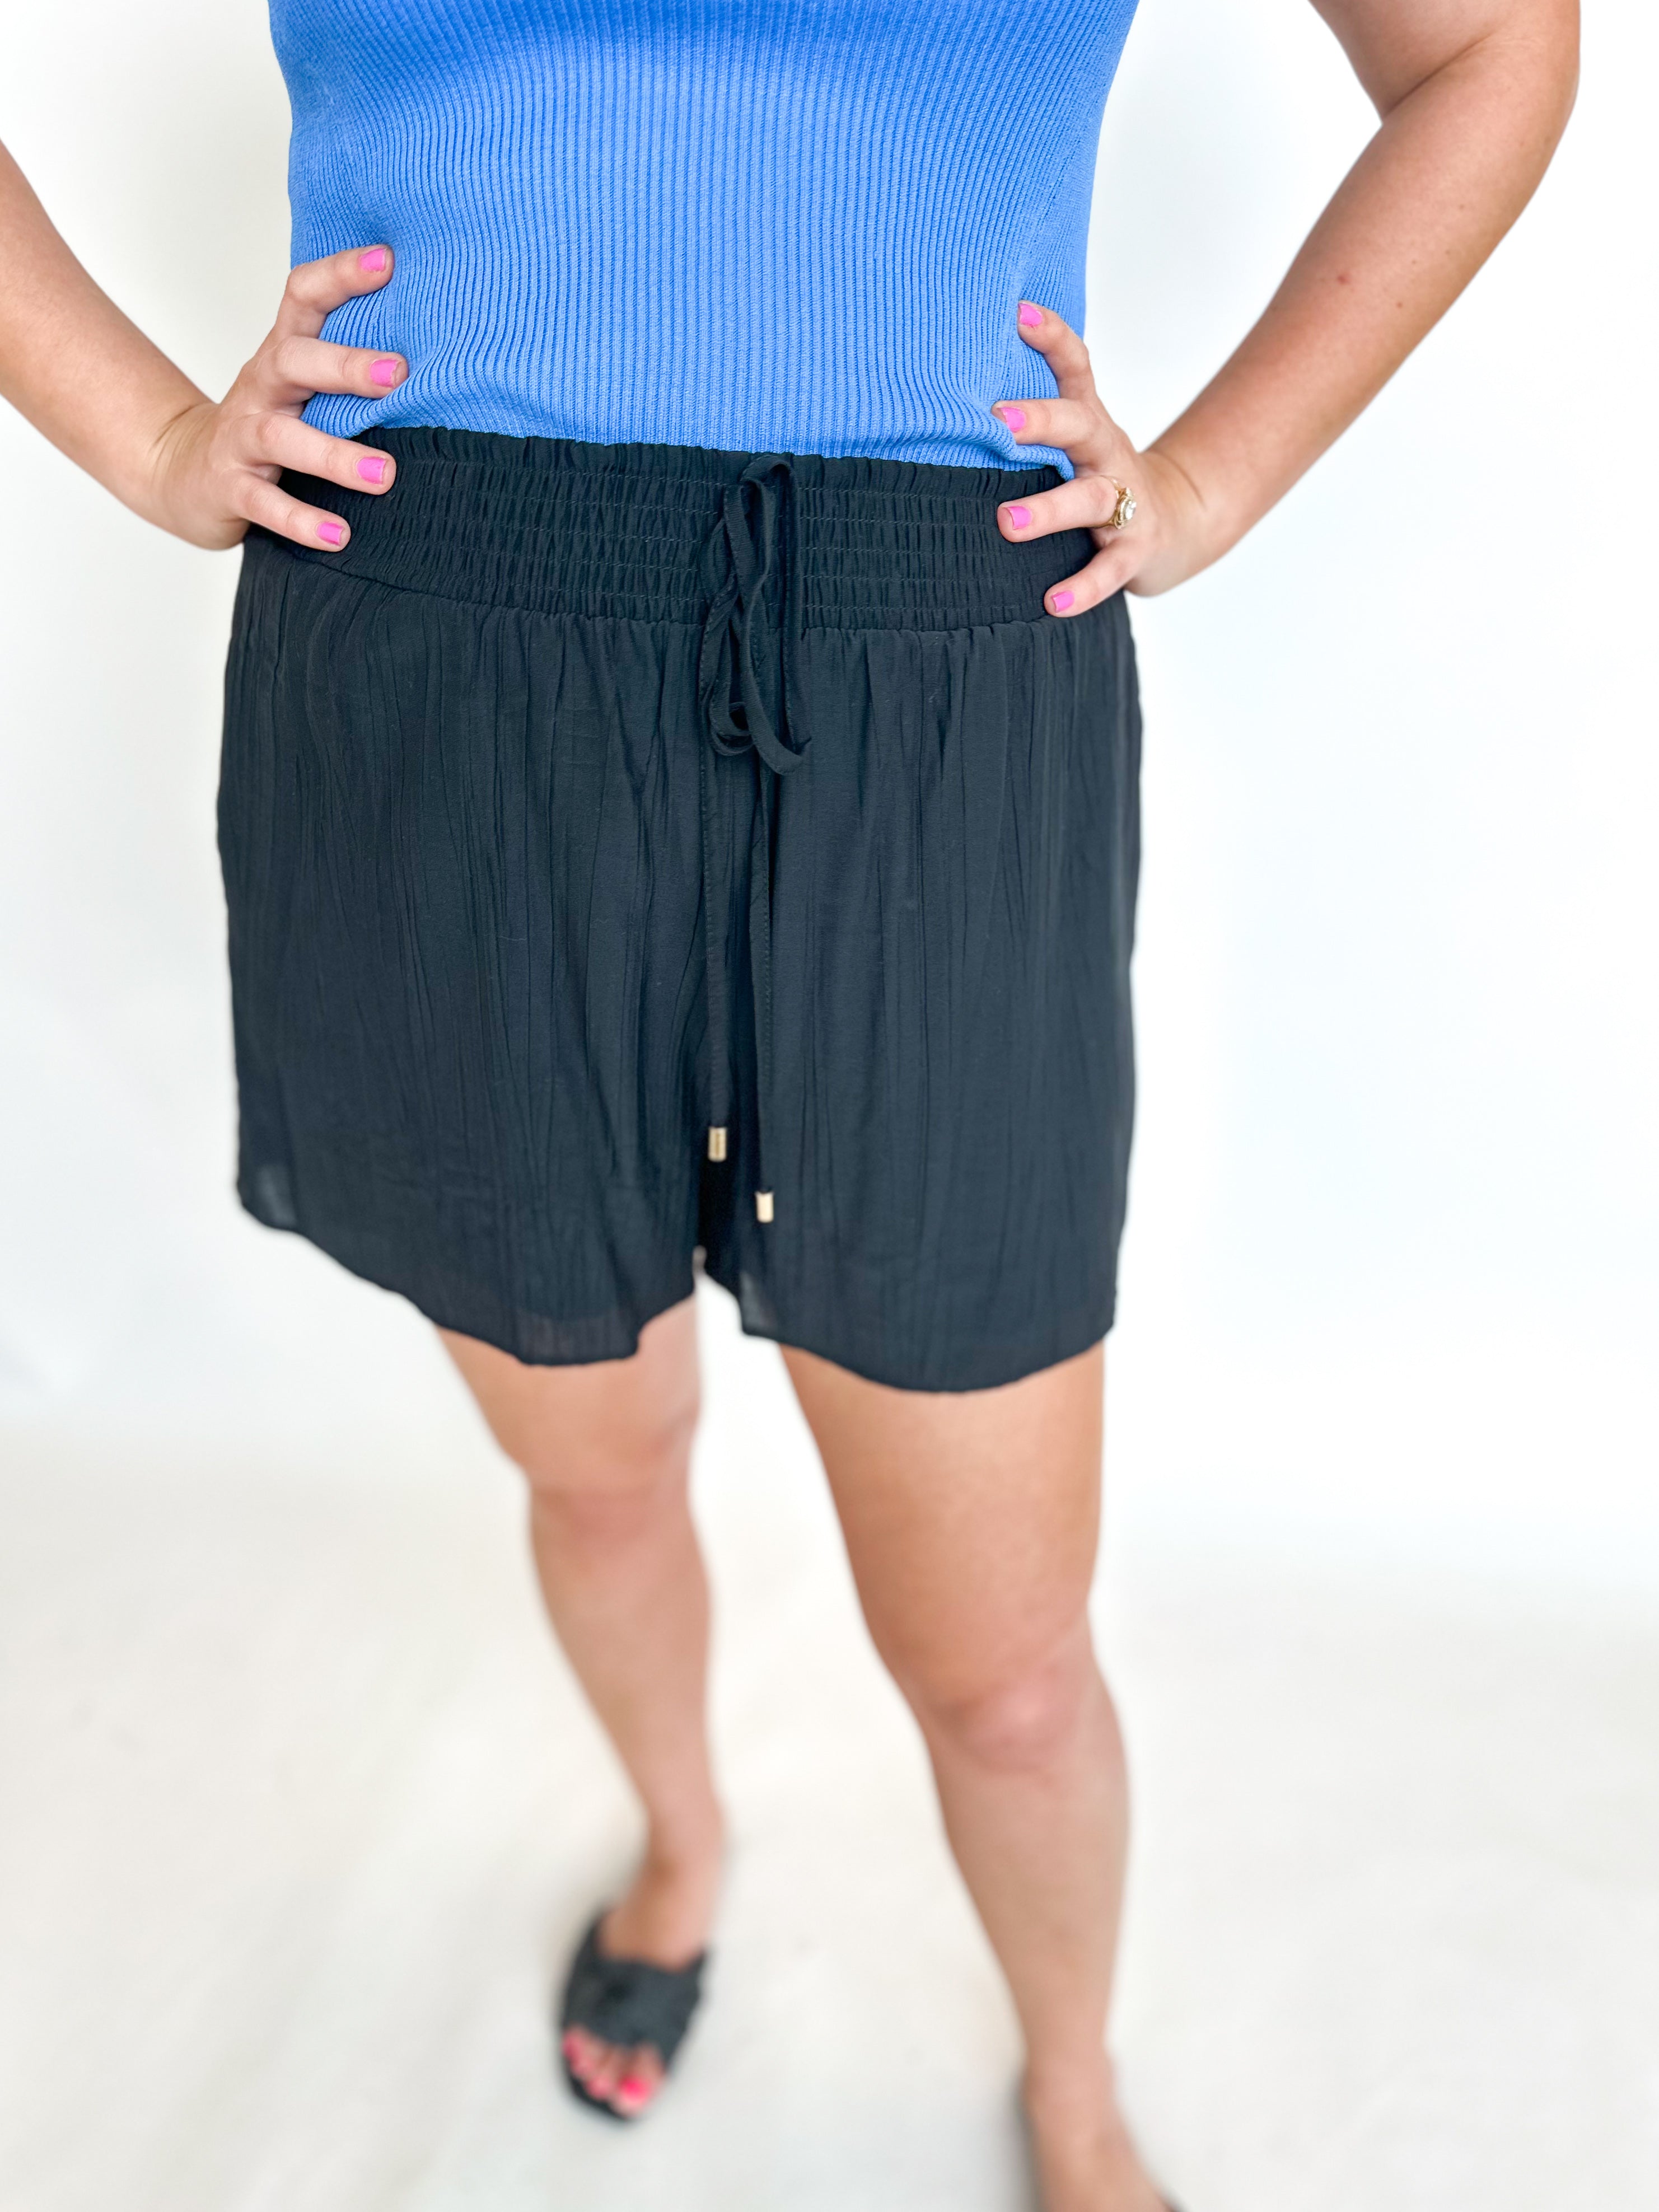 Everyday Comfy Shorts - Black-410 Shorts/Skirts-ALLIE ROSE-July & June Women's Fashion Boutique Located in San Antonio, Texas